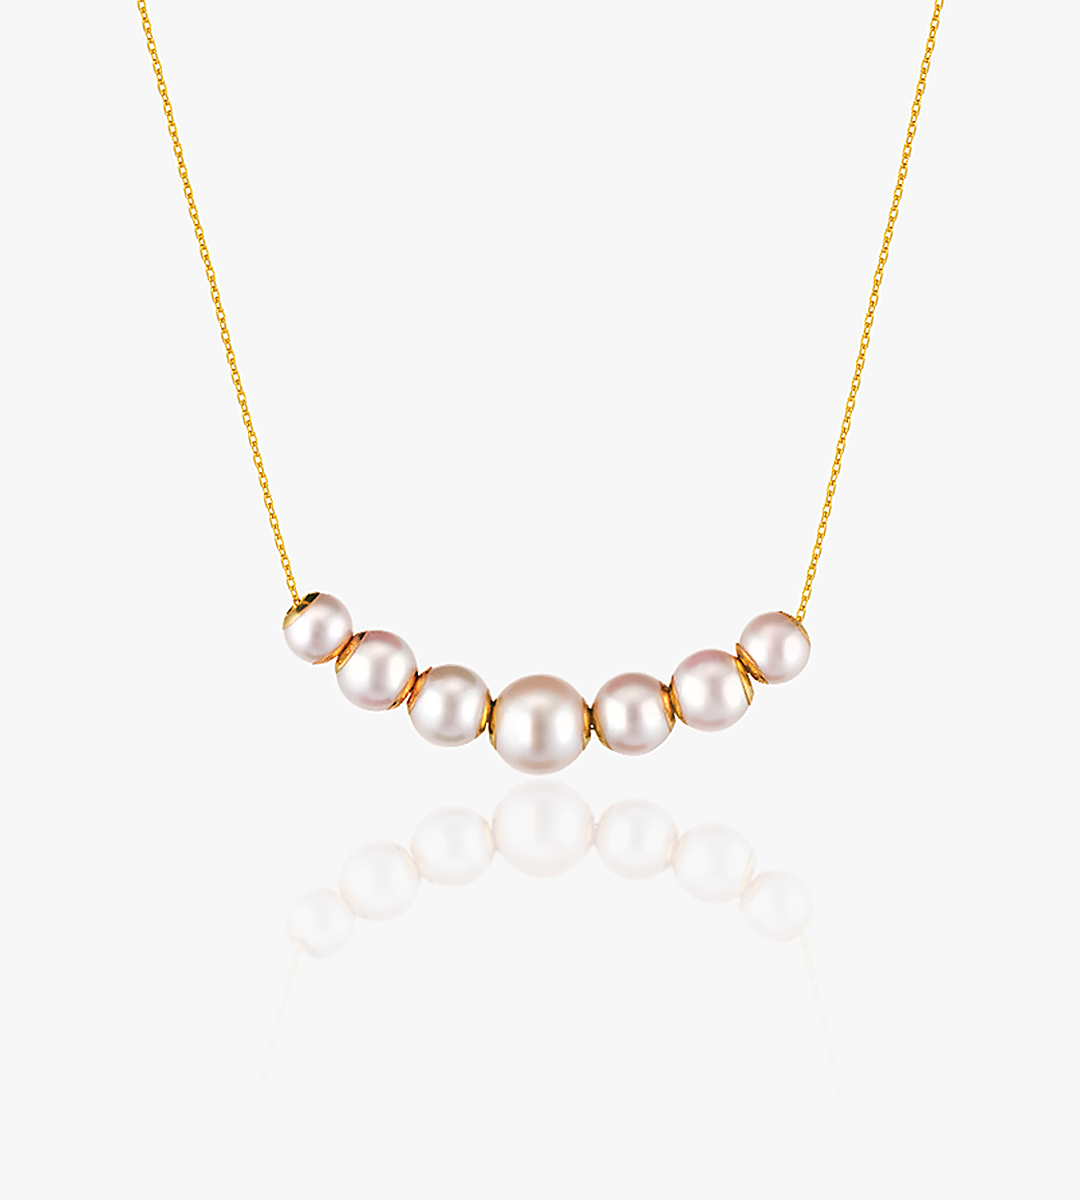 Serenity Pearl Link Chain Necklace in Gold